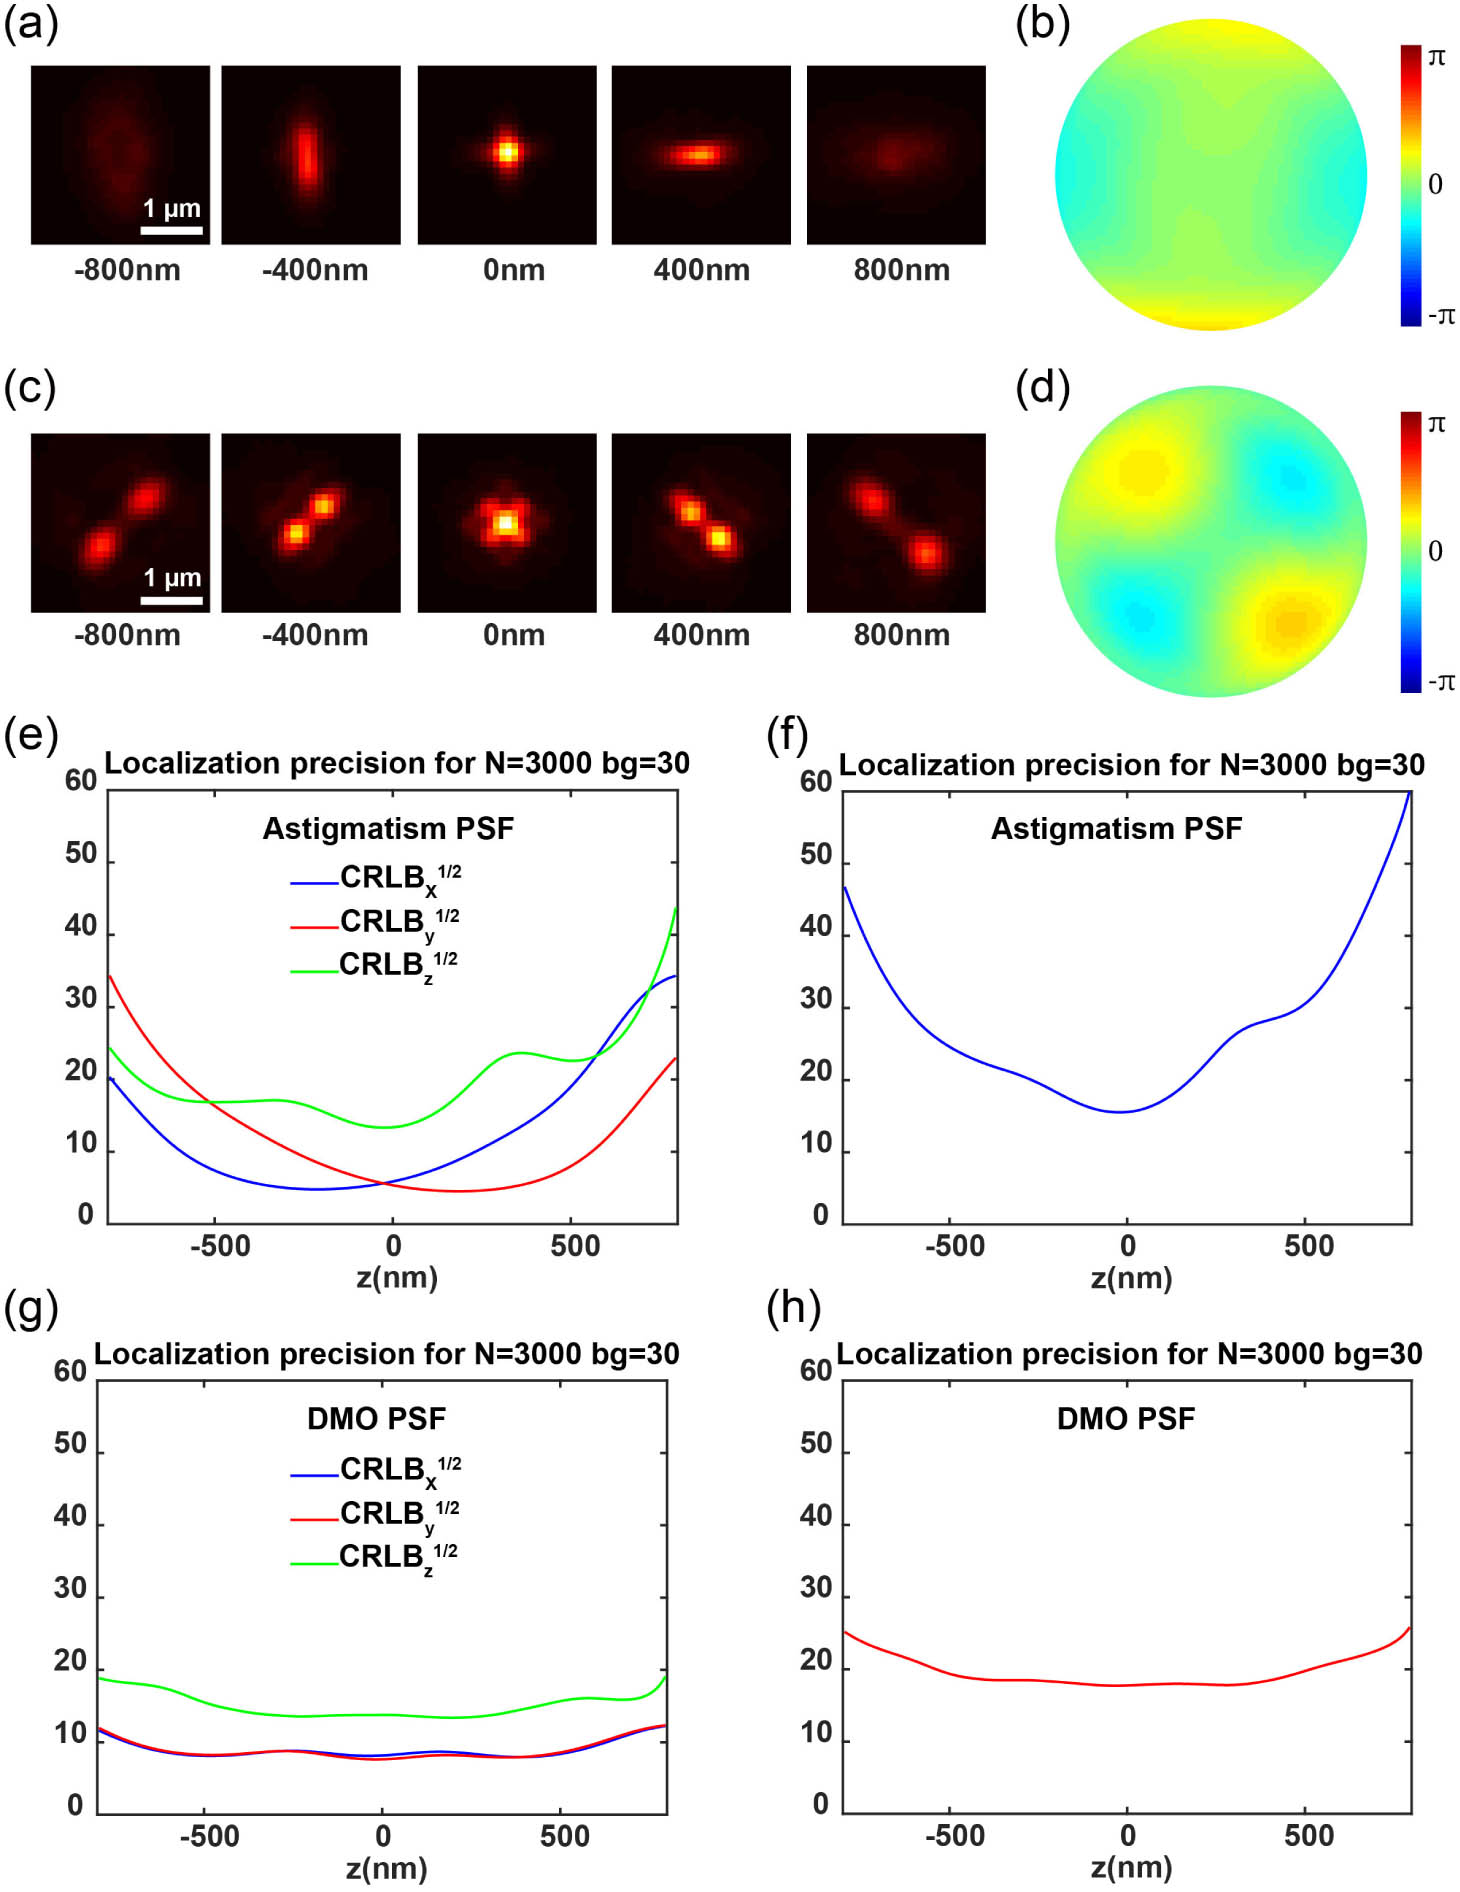 Comparison of the localization precision between experimental astigmatism PSF and DMO PSF. (a) Averaged astigmatism PSF of fluorescent beads on the coverslip, with PSFs at axial positions from −800 to 800 nm. (b) The pupil function corresponding to the astigmatism PSF of beads. (c) Averaged DMO PSF of fluorescent beads, identical to the range described in (a). (d) Same as (b) for DMO PSF. (e) x, y, and z localization precisions at different axial positions for astigmatism PSF. For the CRLB calculation, we used 3000 photons and 30 background photons to simulate the typical photon flux of fluorescent dyes. (f) 3D CRLB of astigmatism PSF. (g) x, y, and z localization precisions for DMO PSF. (h) 3D CRLB of DMO PSF.